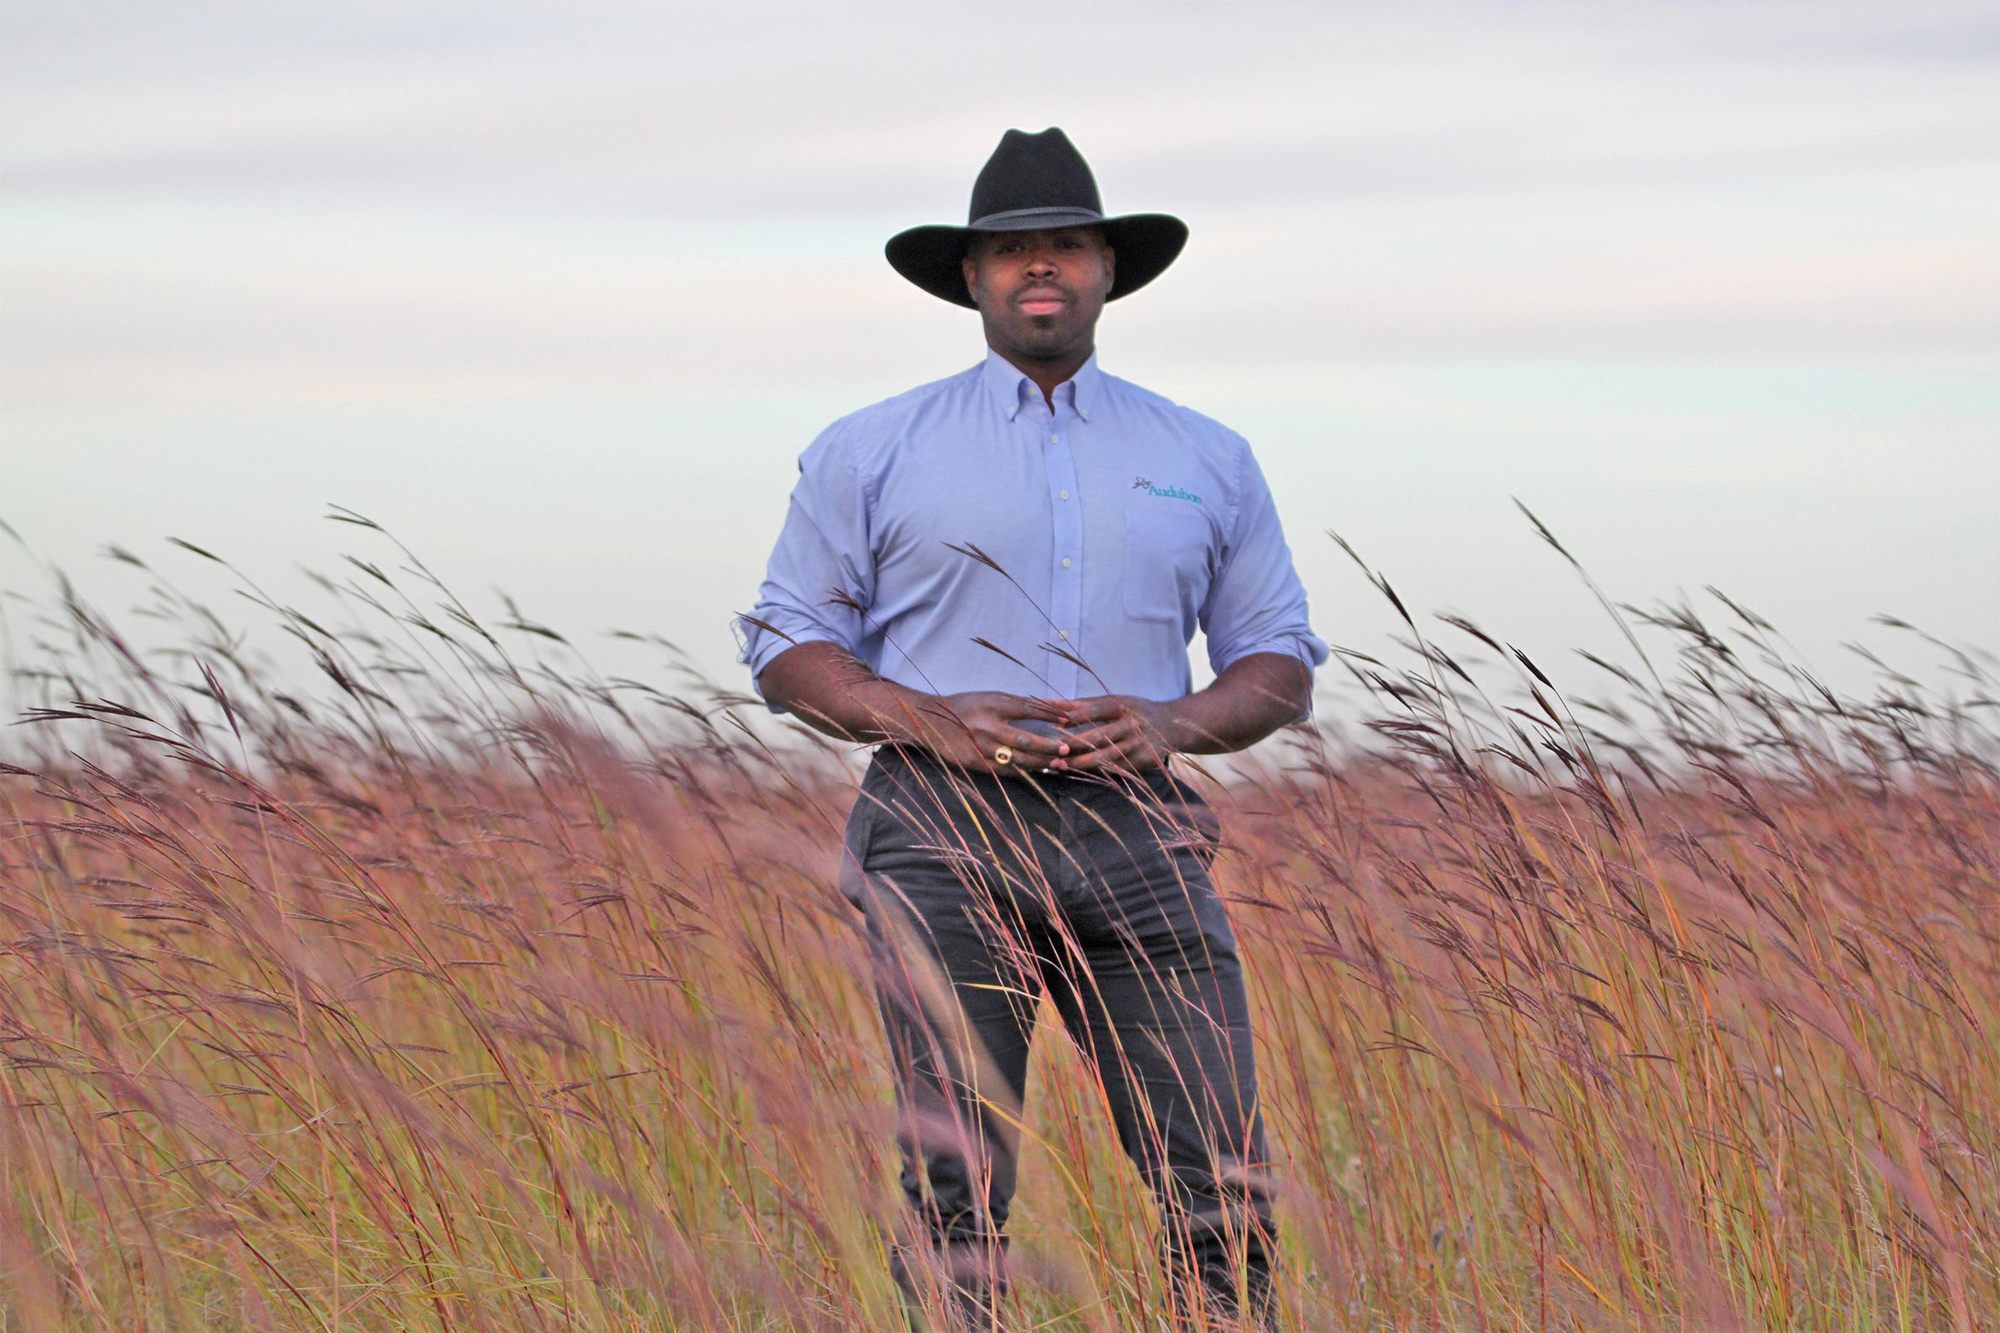 Marshall Johnson stands and looks at camera in field while wearing blue shirt and black cowboy hat April 2022.